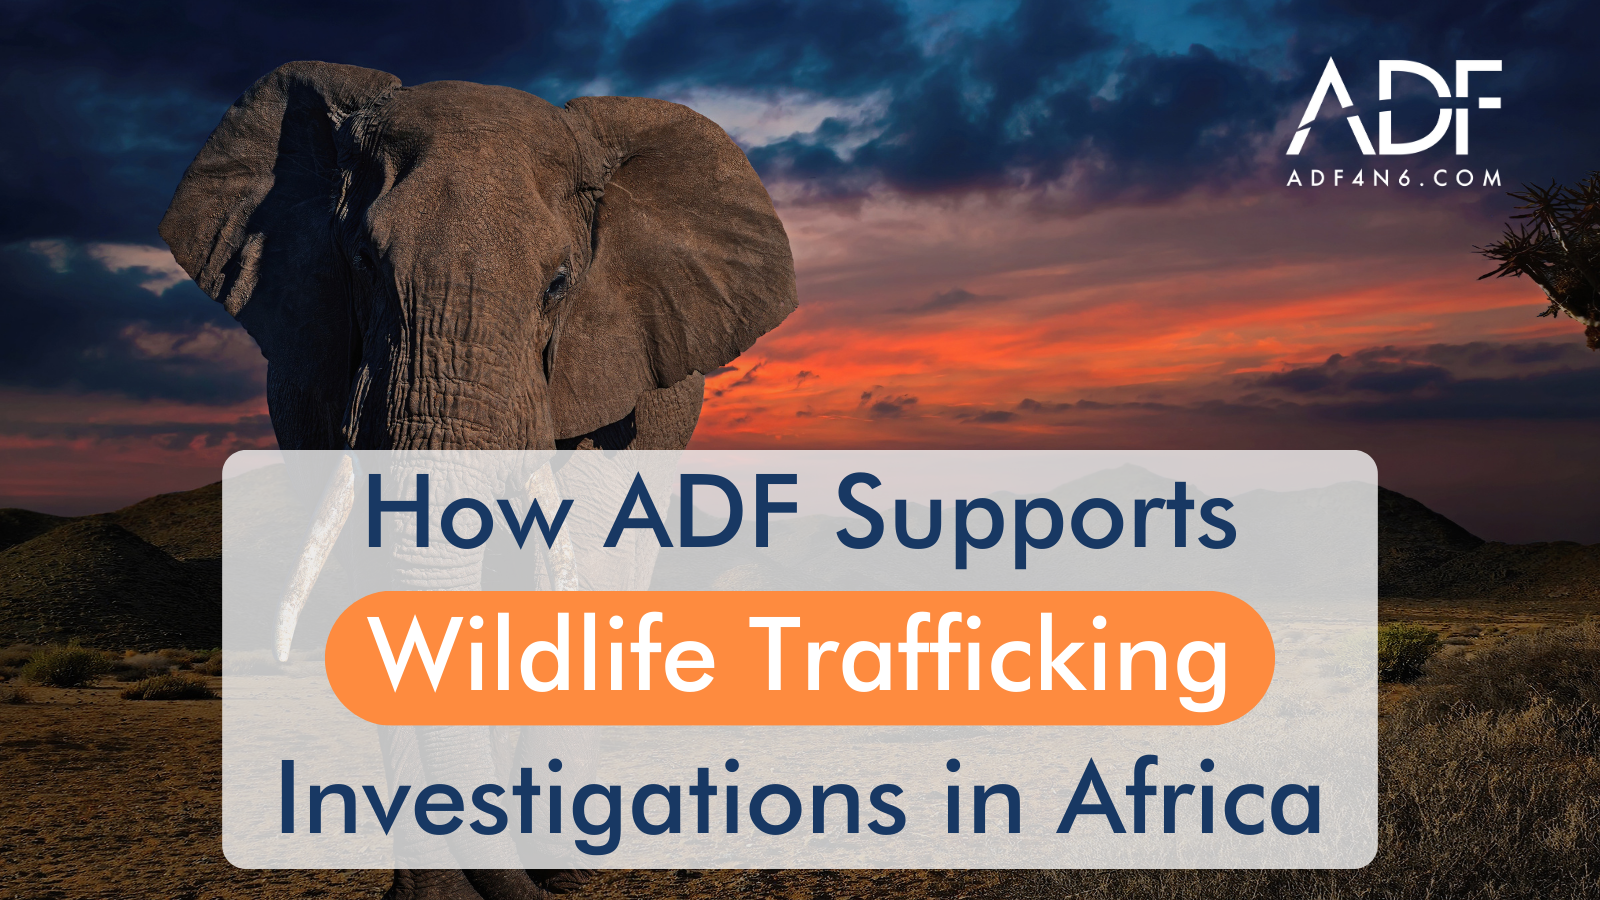 How ADF Supports Wildlife Trafficking Investigations in Africa